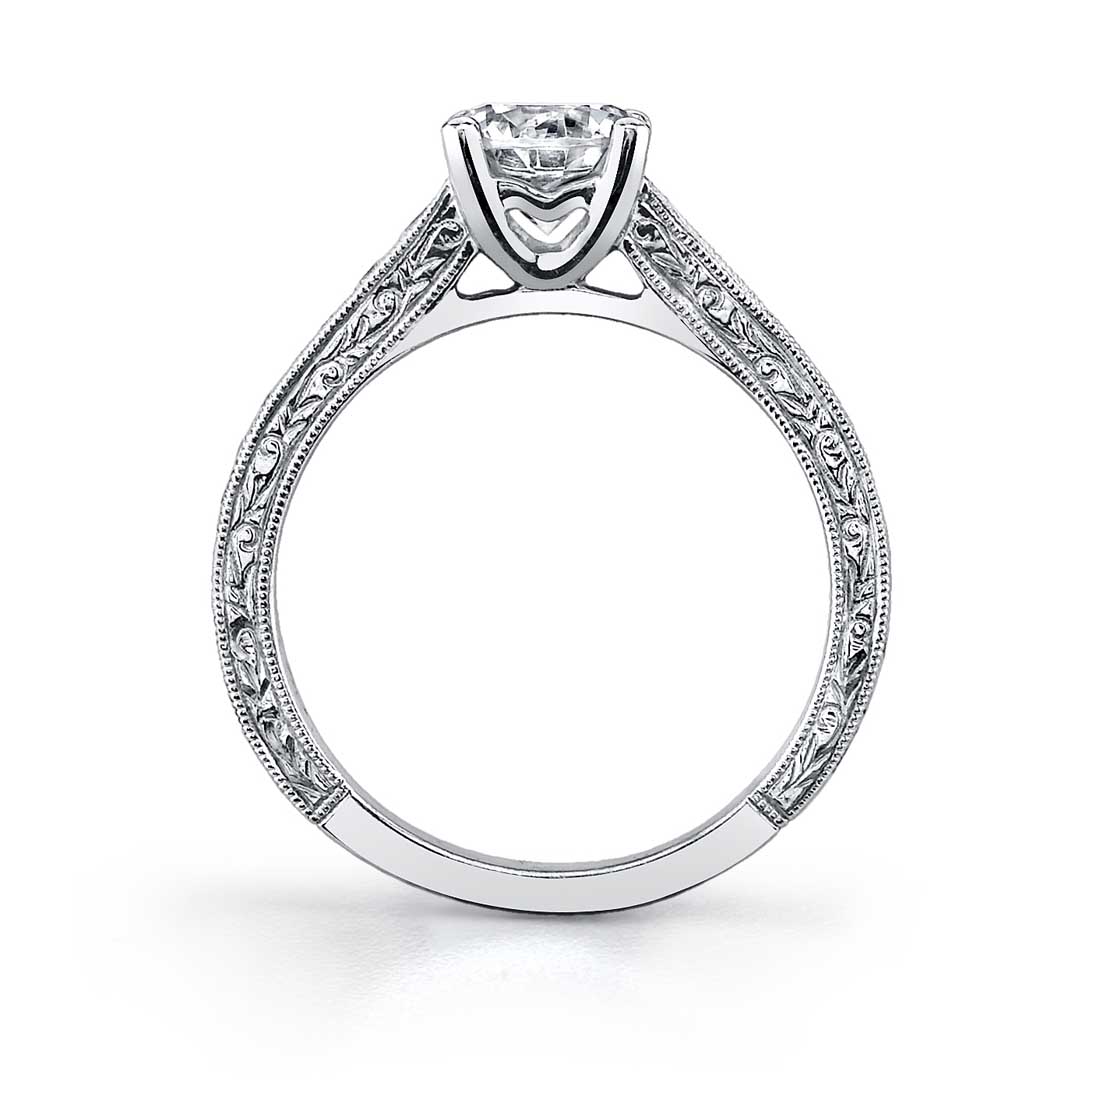 Profile Image of a Round Hand Engraved Engagement Ring